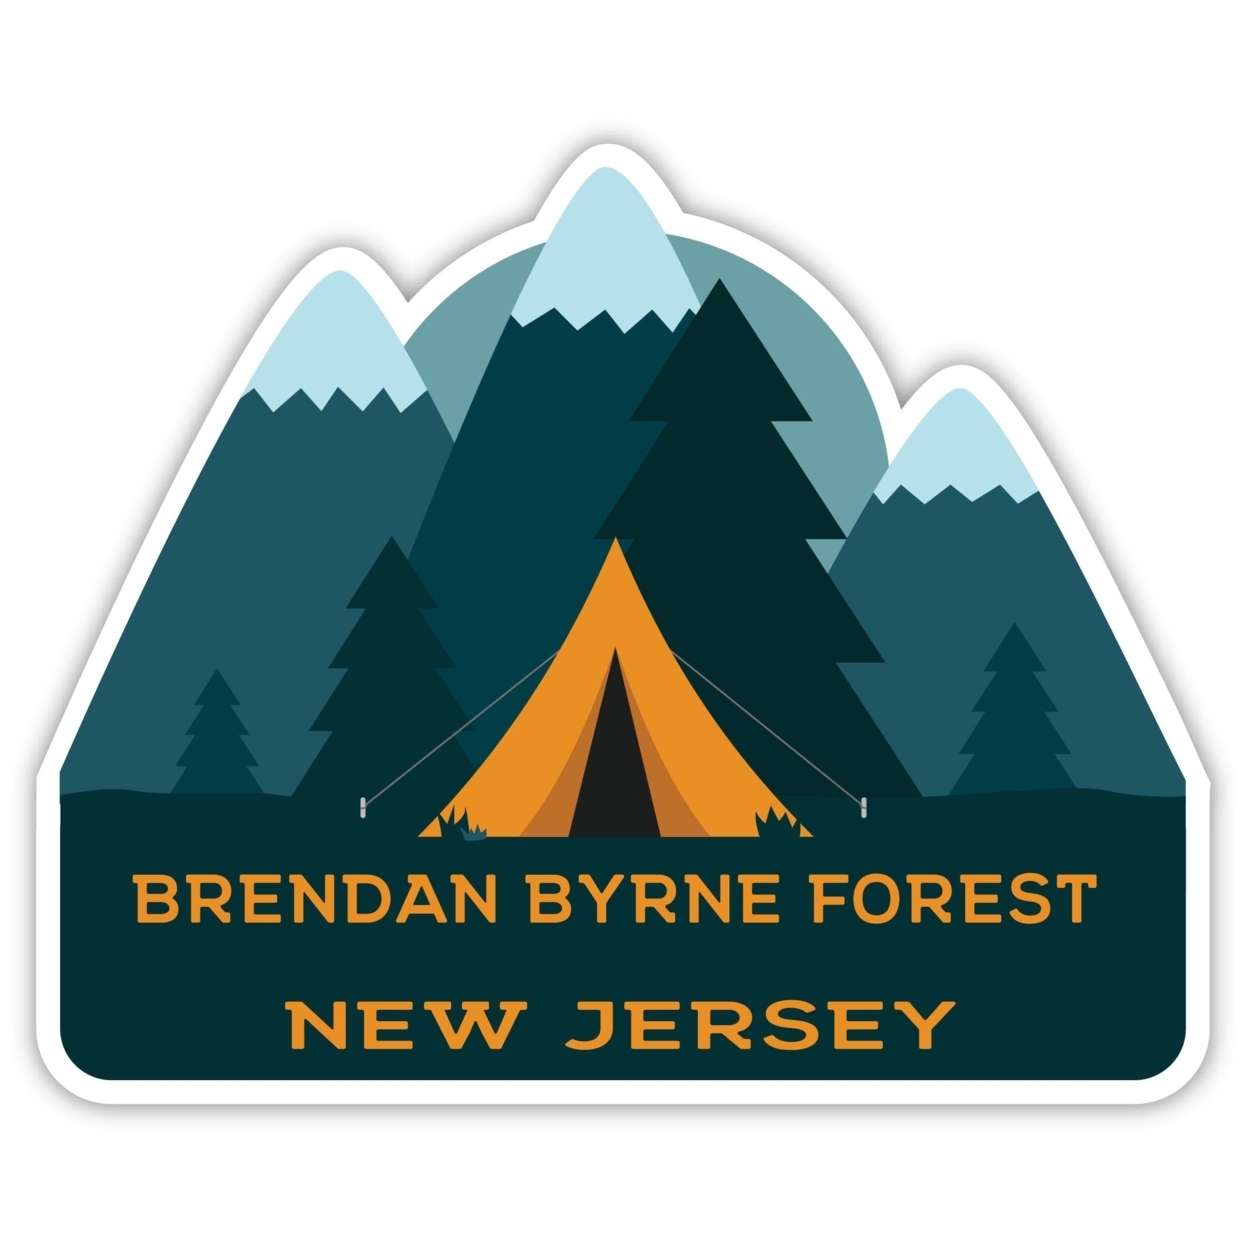 Brendan Byrne Forest New Jersey Souvenir Decorative Stickers (Choose Theme And Size) - 4-Pack, 6-Inch, Tent